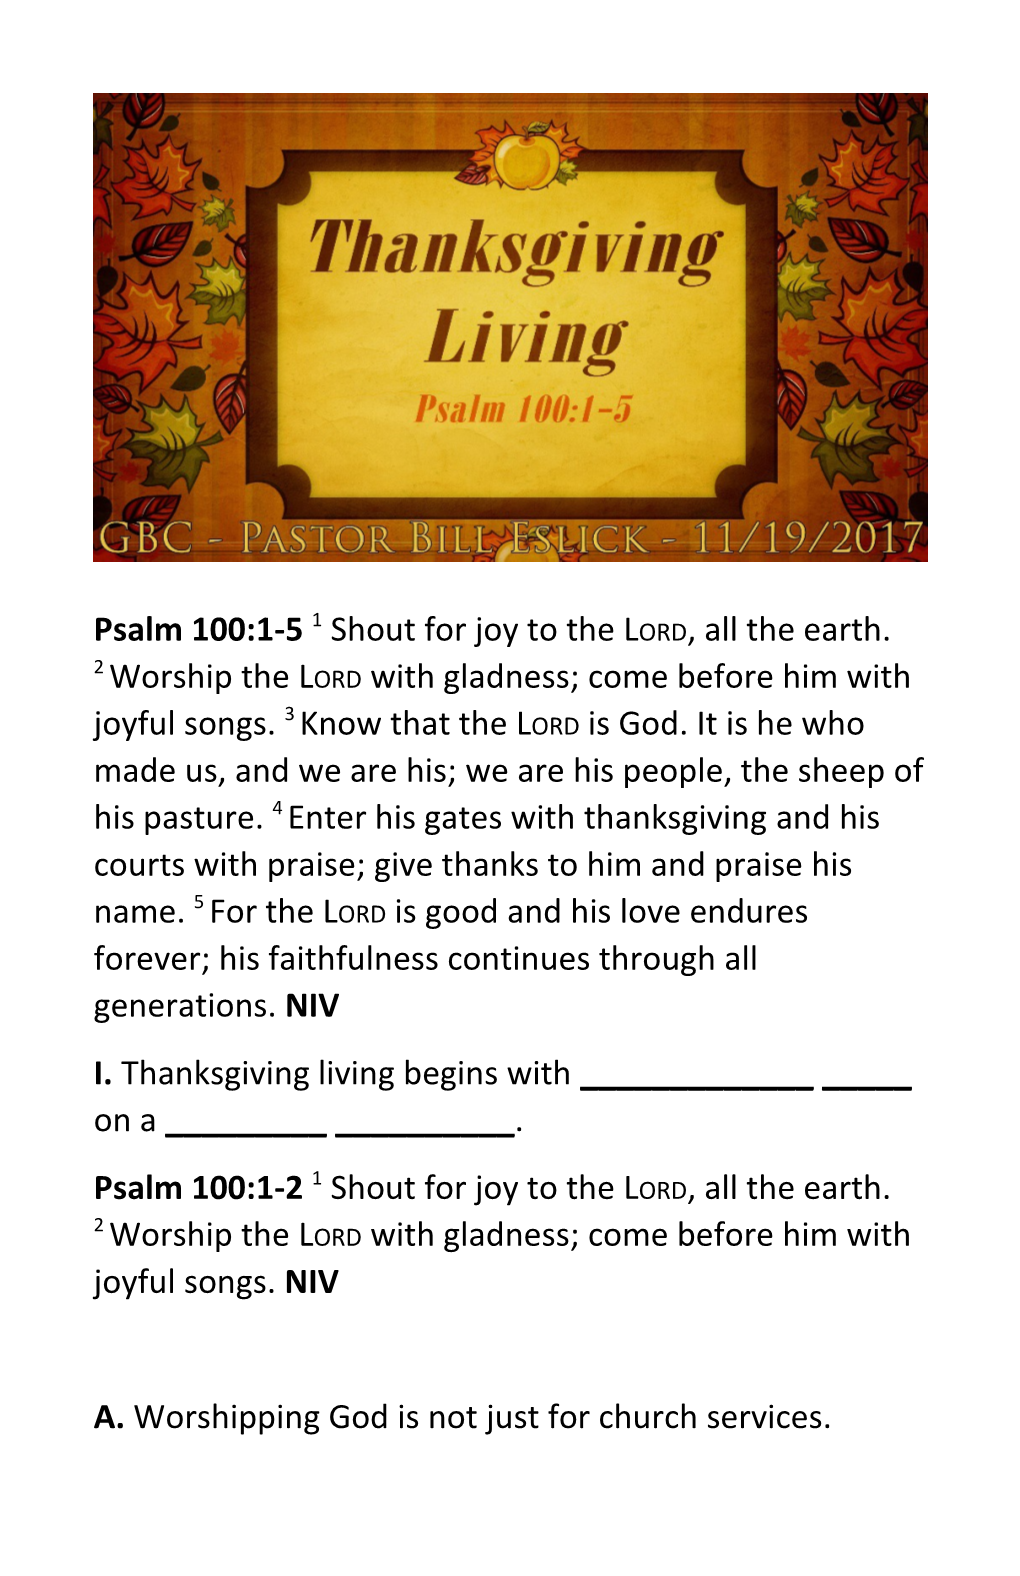 Psalm 100:1-5 1Shout for Joy to the Lord, All the Earth.2Worship the Lord with Gladness;Come